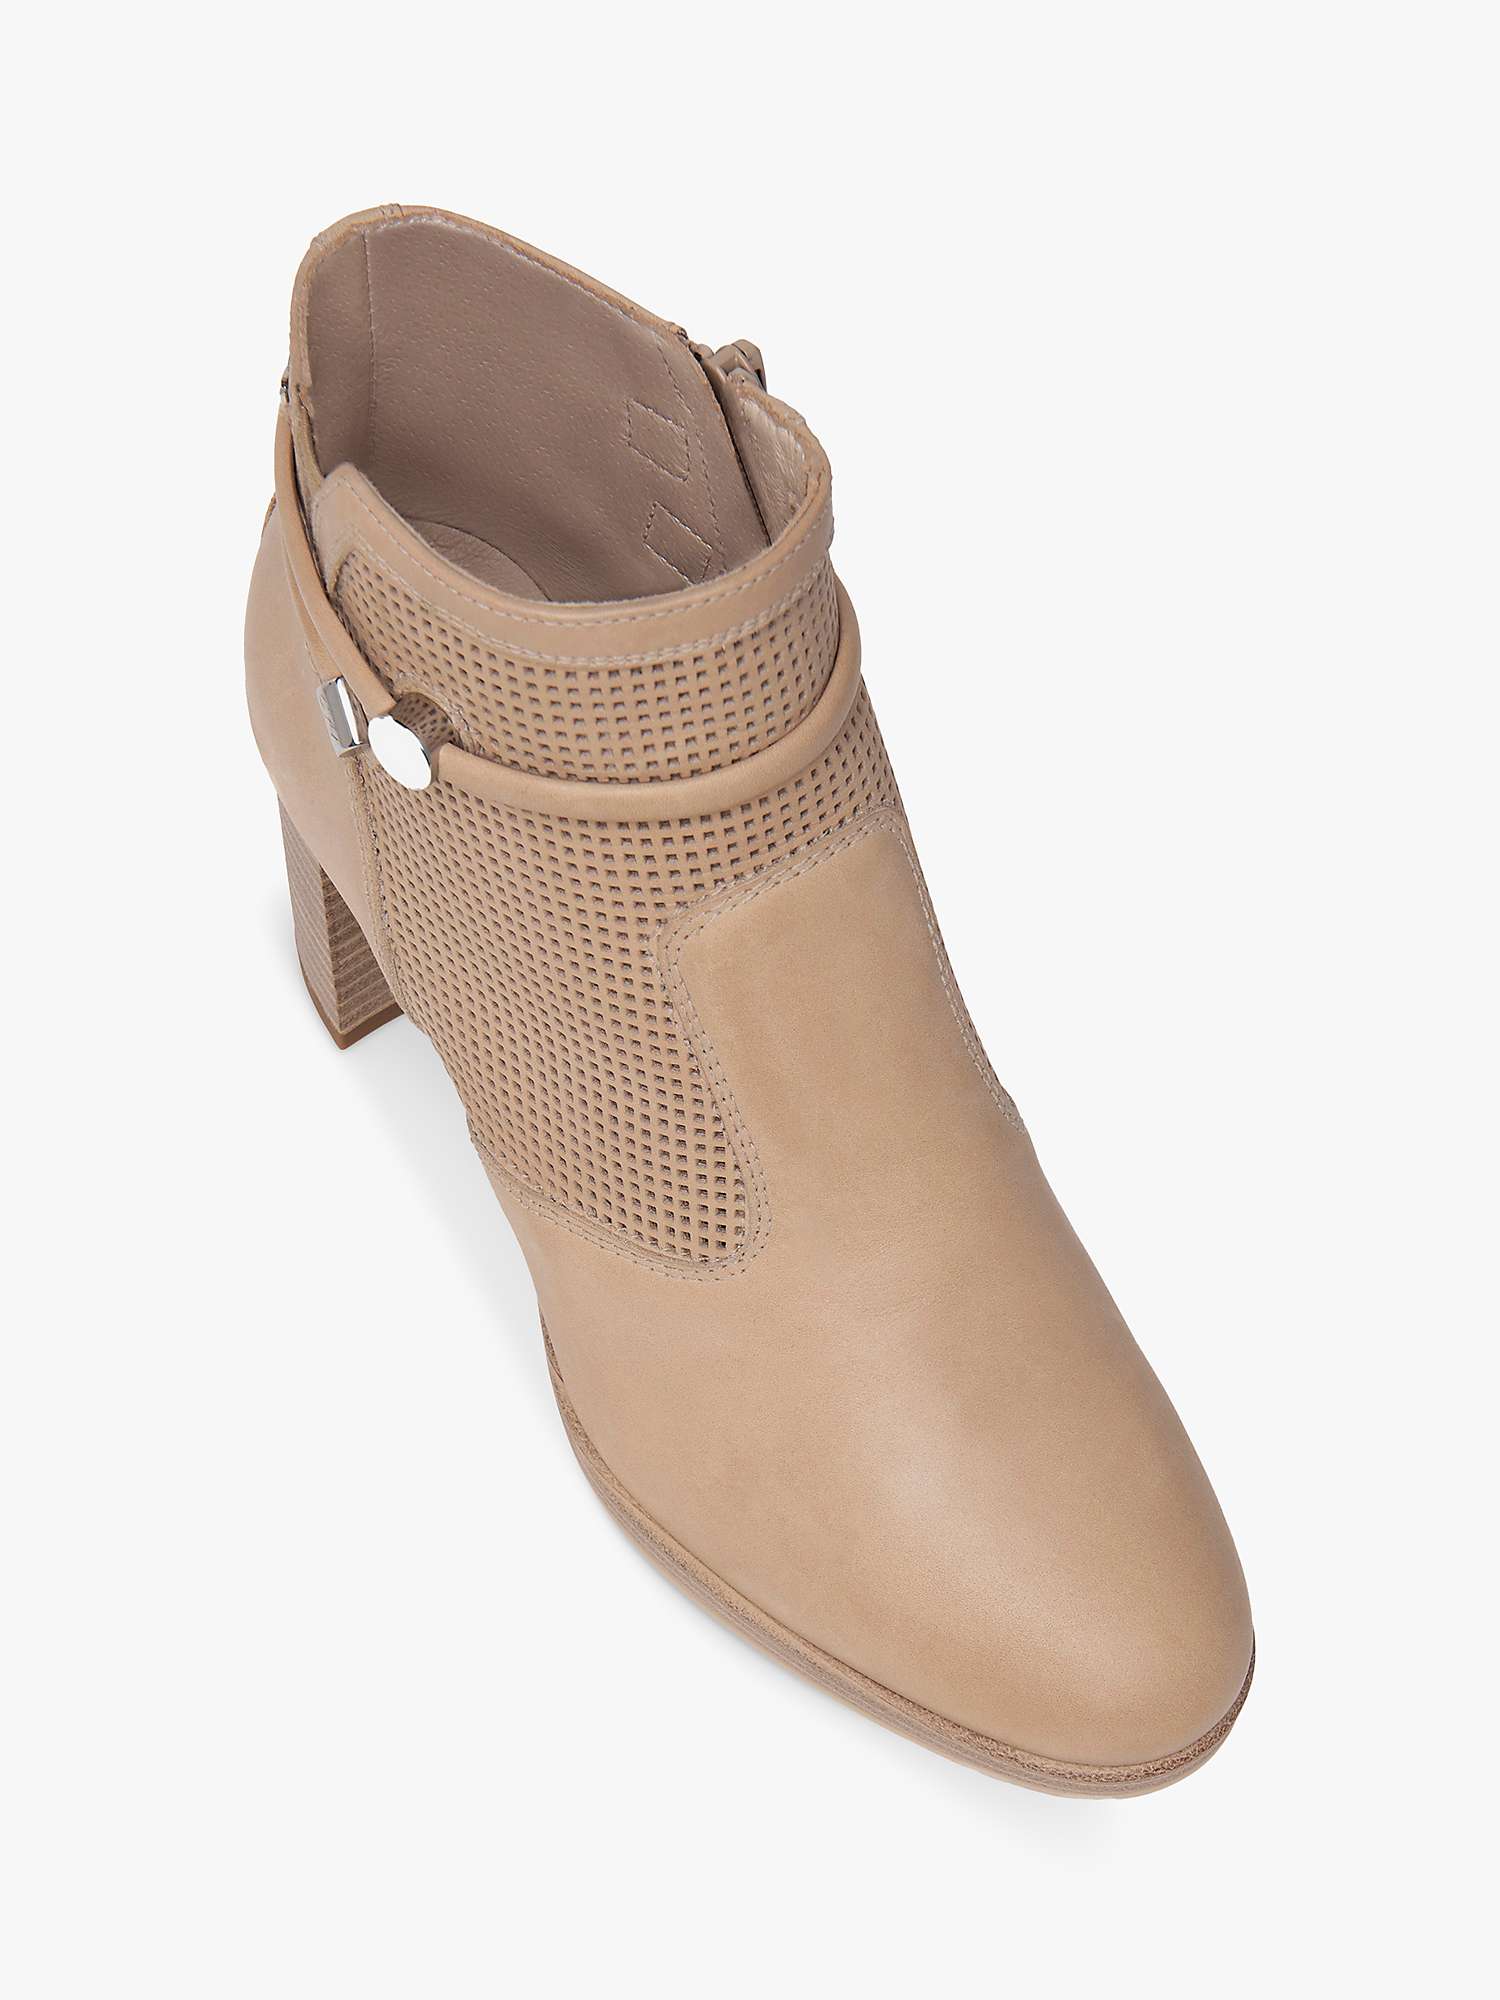 Buy NeroGiardini Perforated Leather Platform Ankle Boots, Champagne Online at johnlewis.com